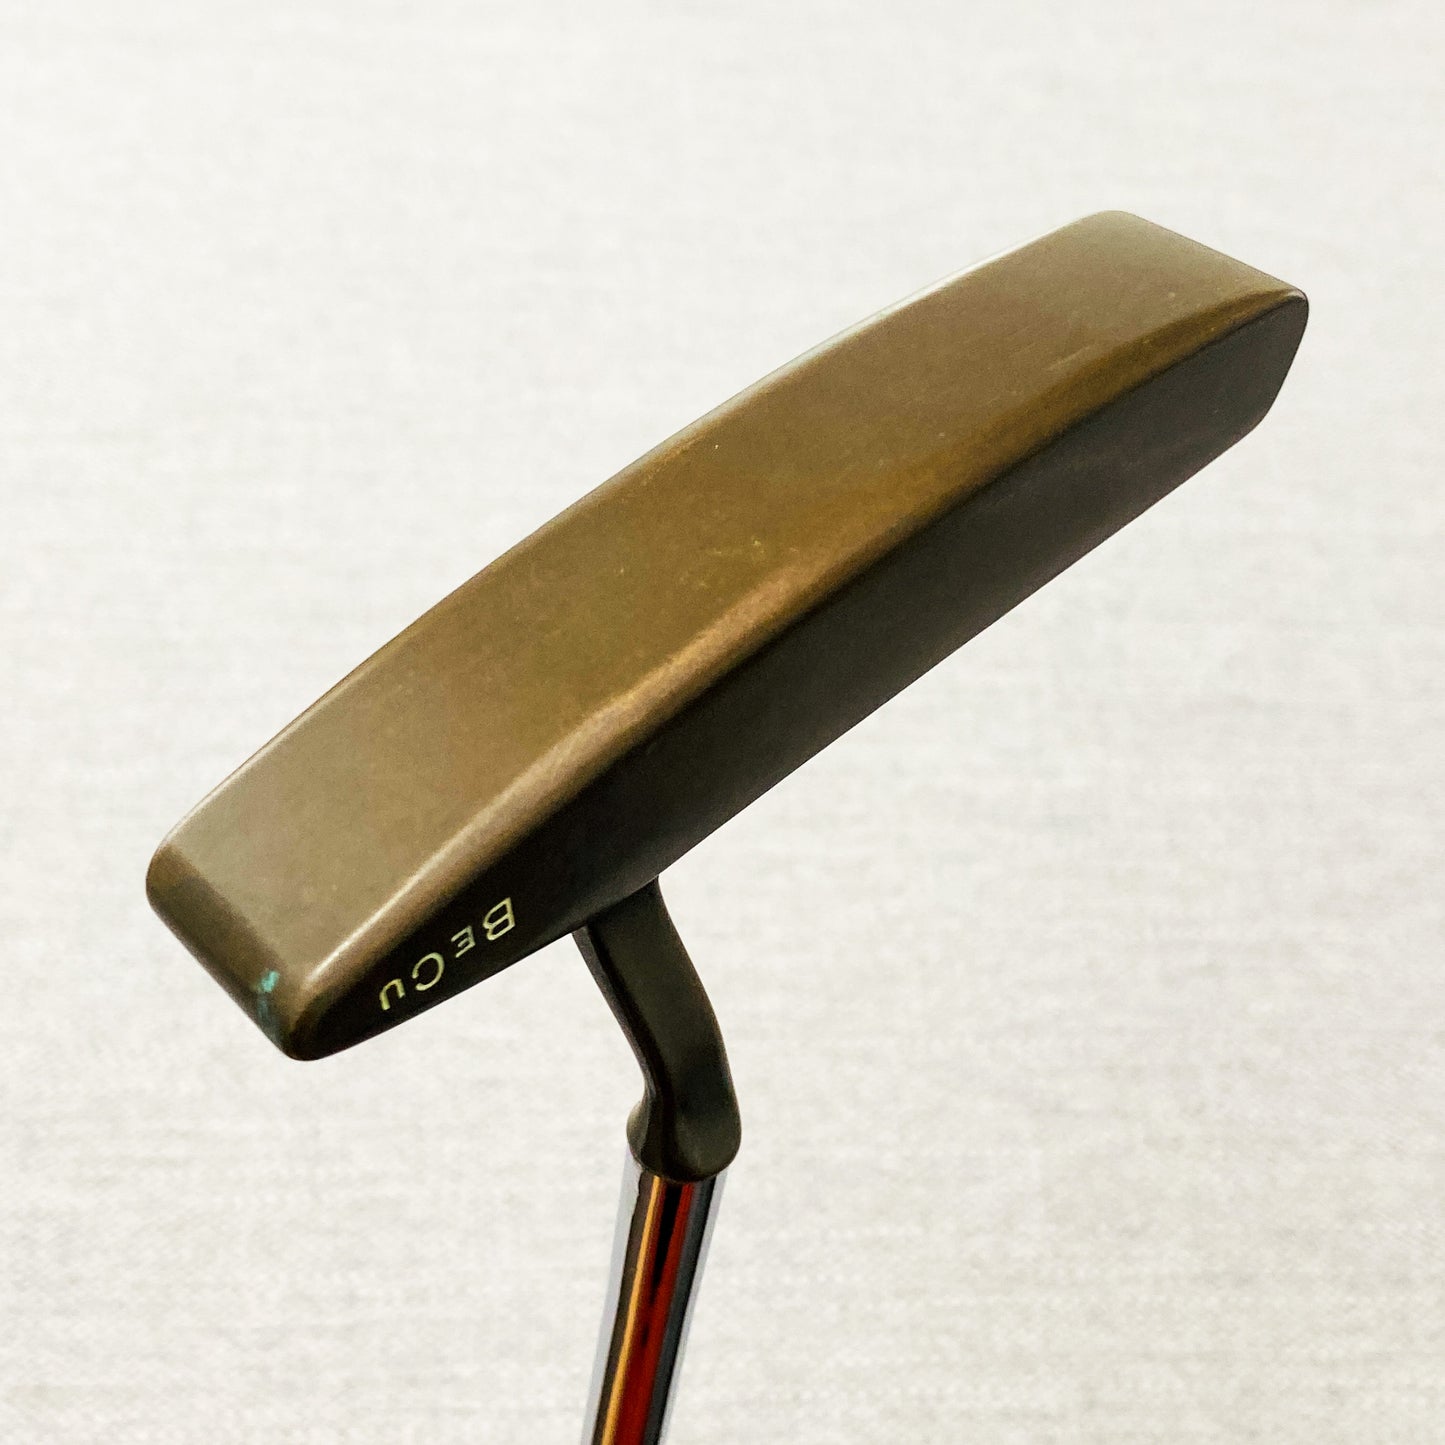 PING Pal 2 Beryllium Copper Putter. 37 inch - Excellent Condition # 13609